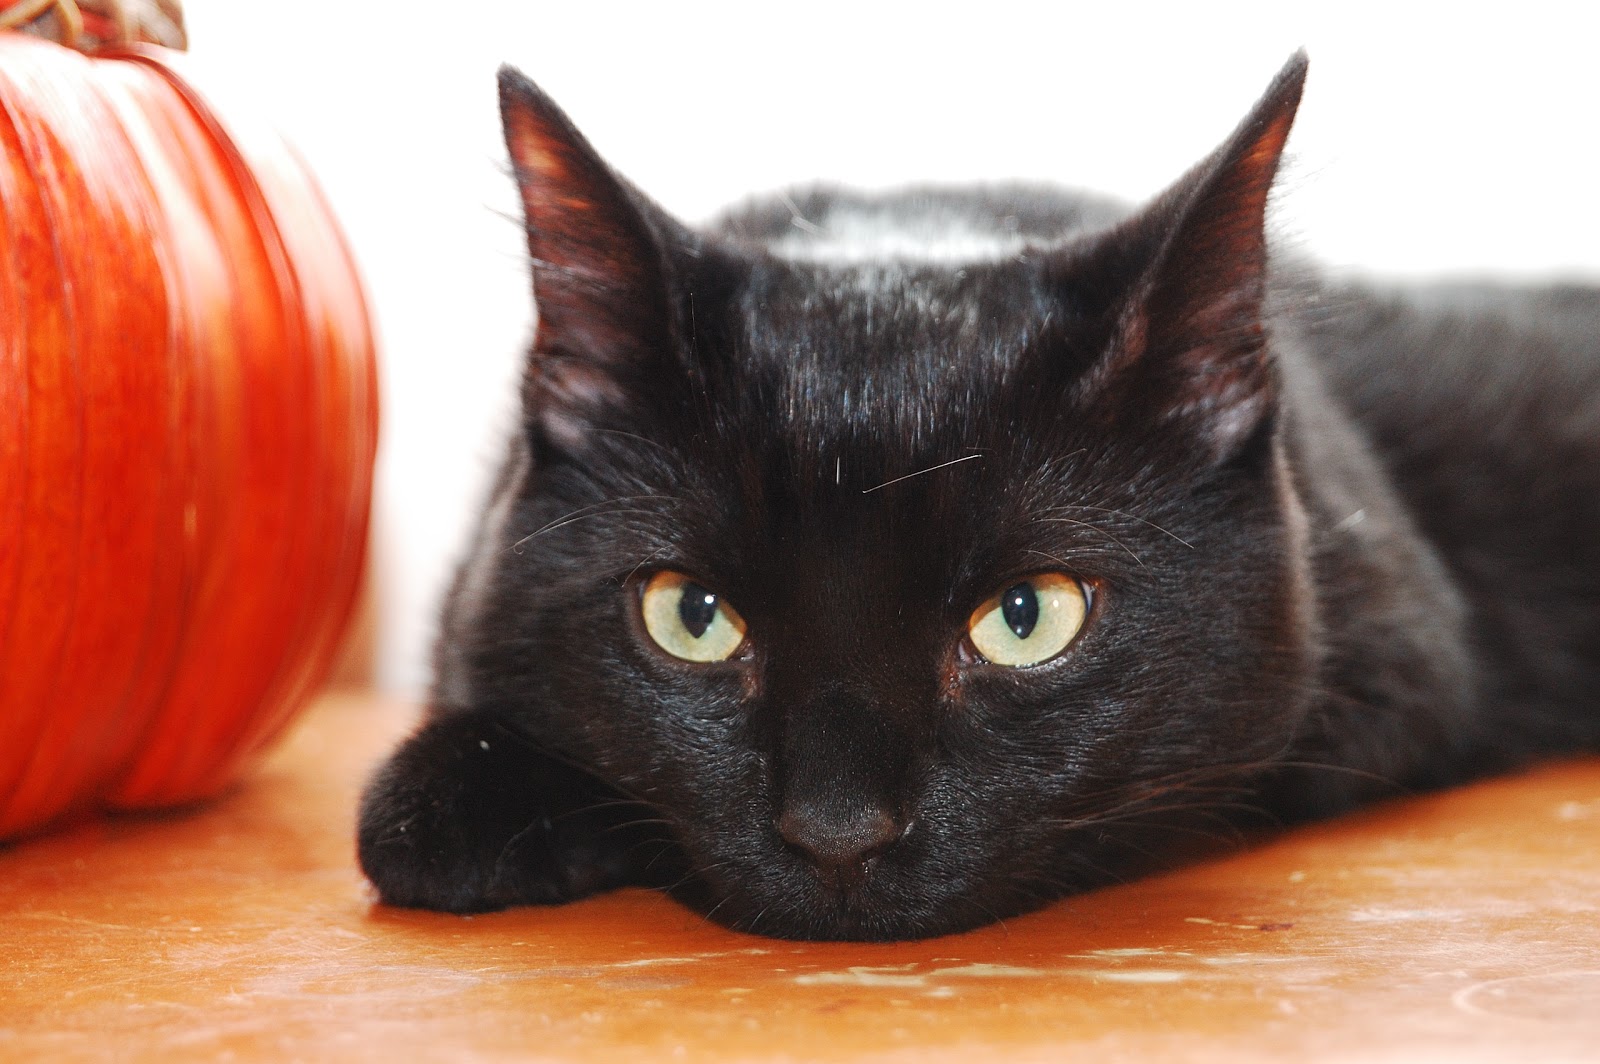 raining cats and dogs: Why You Can't Adopt Black Cats on Halloween